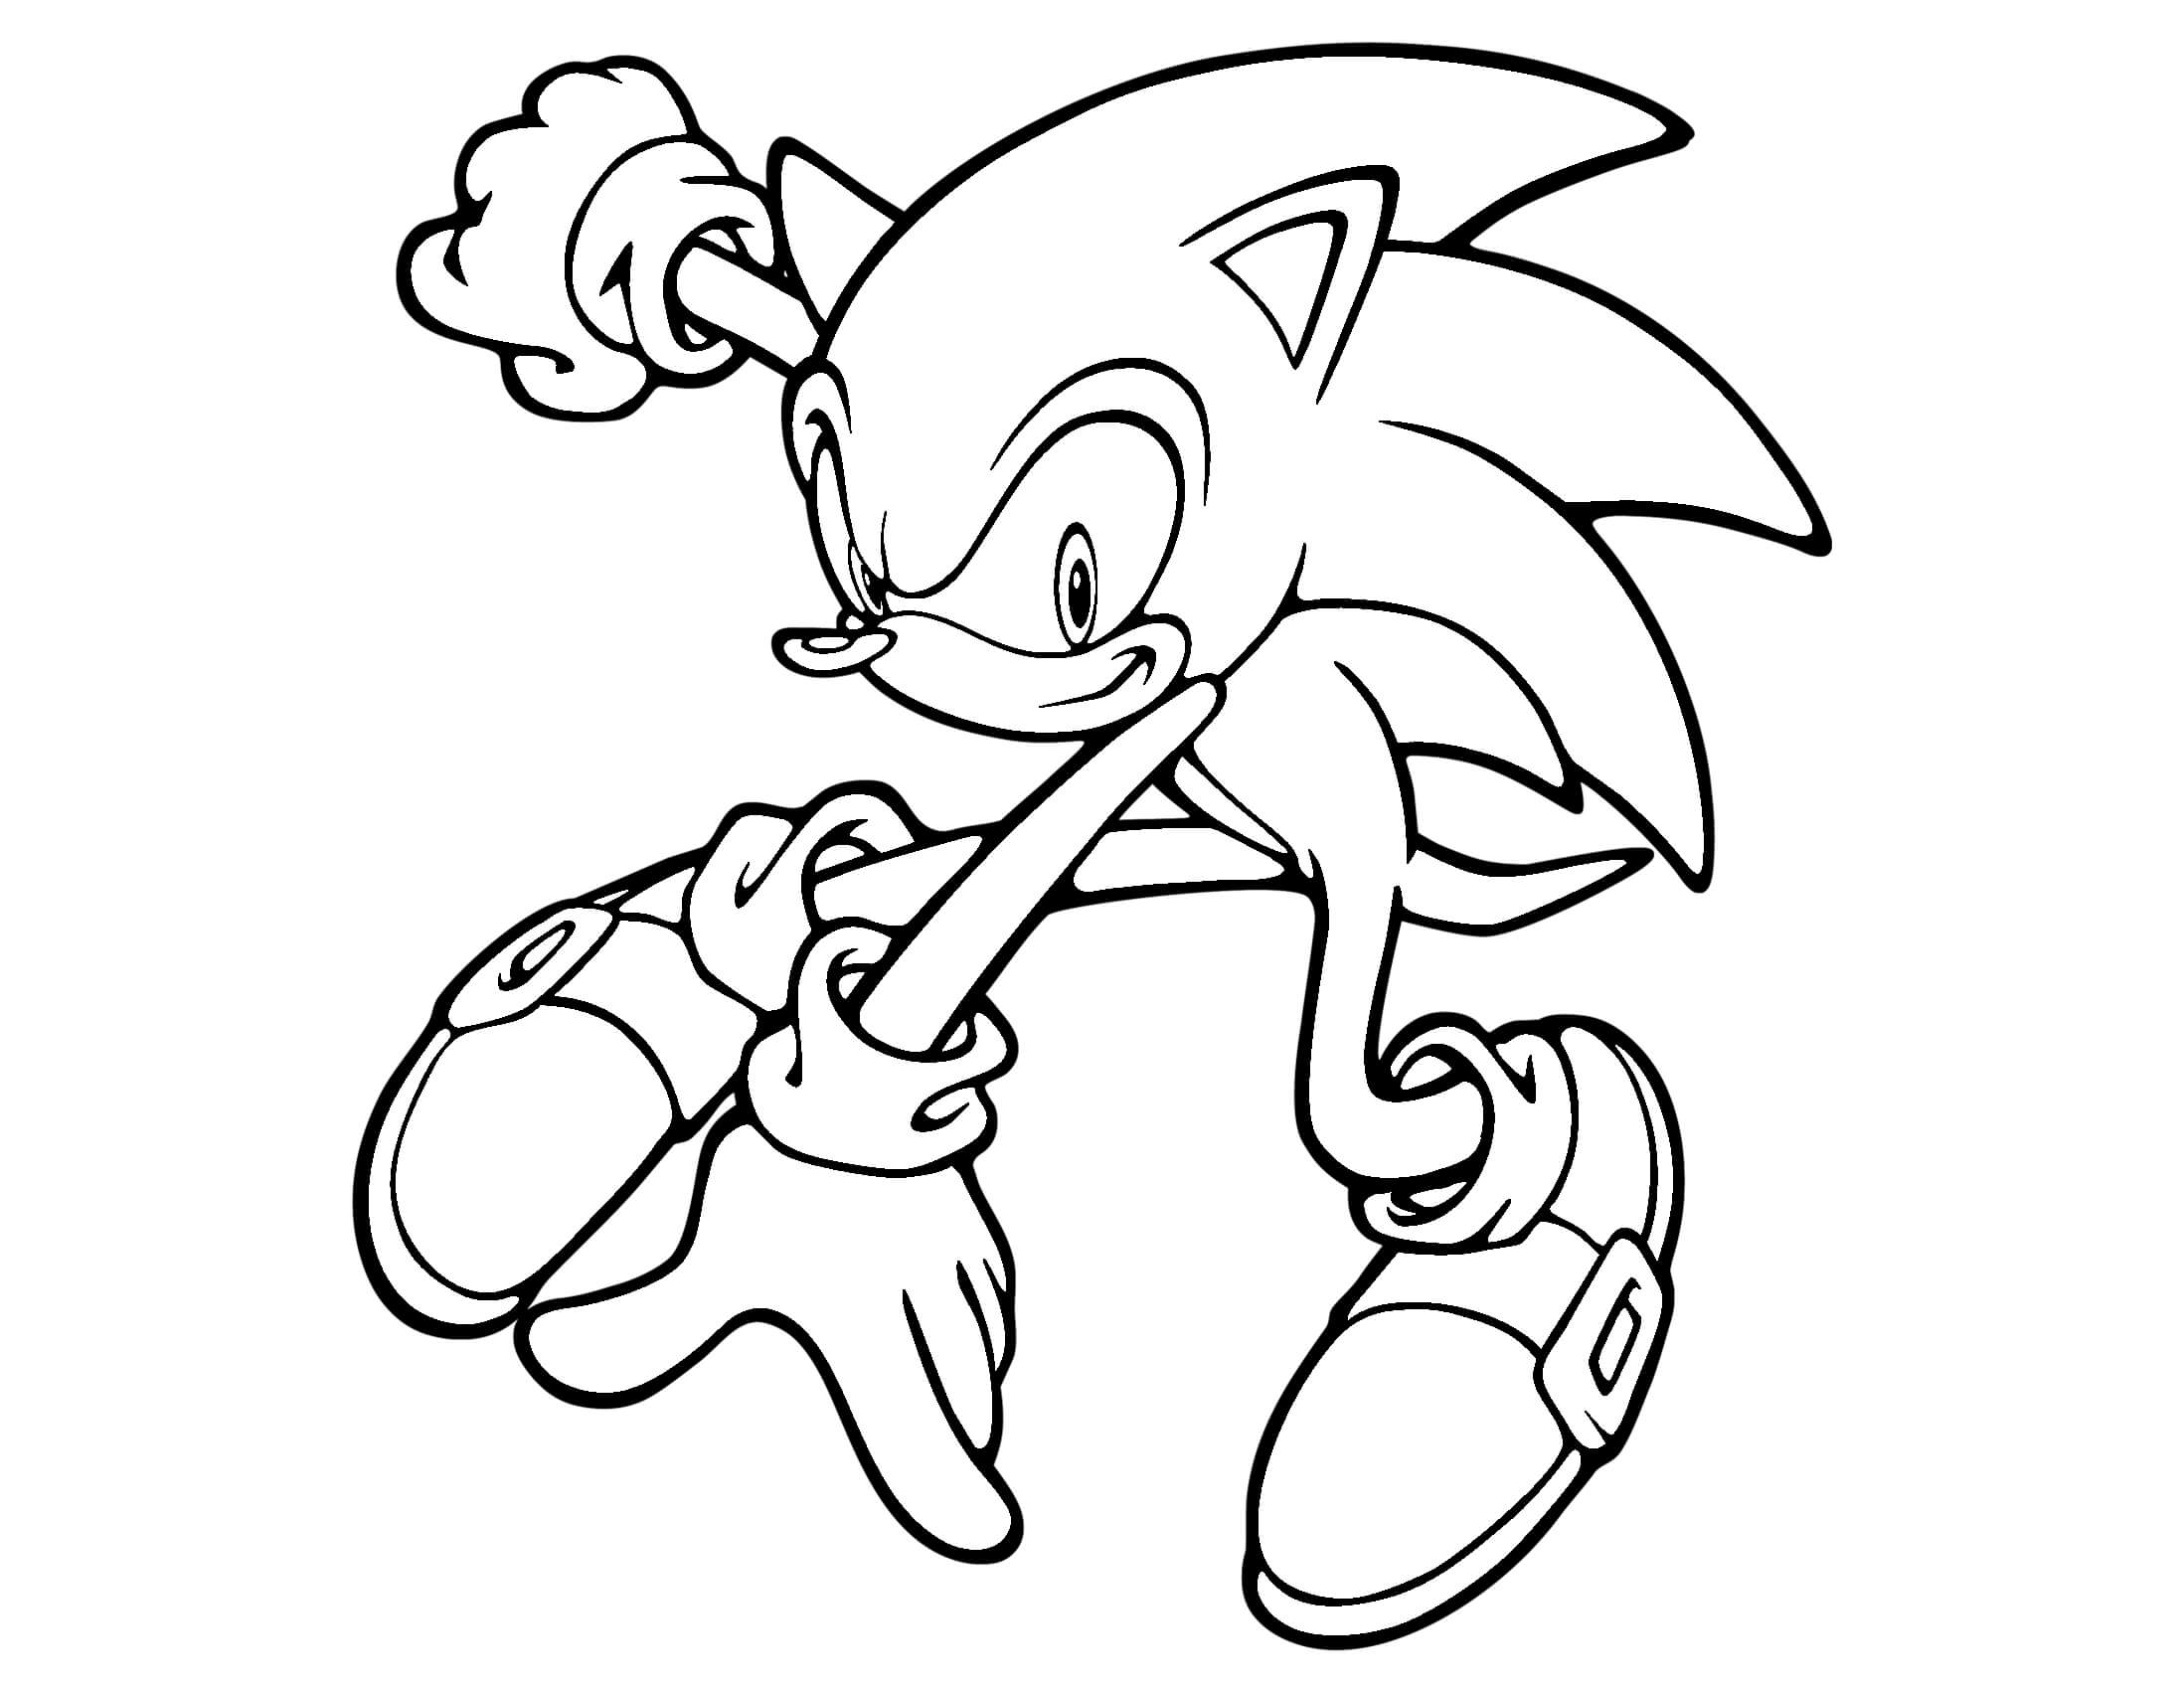 Sonic And Amy Coloring Pages at GetColorings.com | Free printable